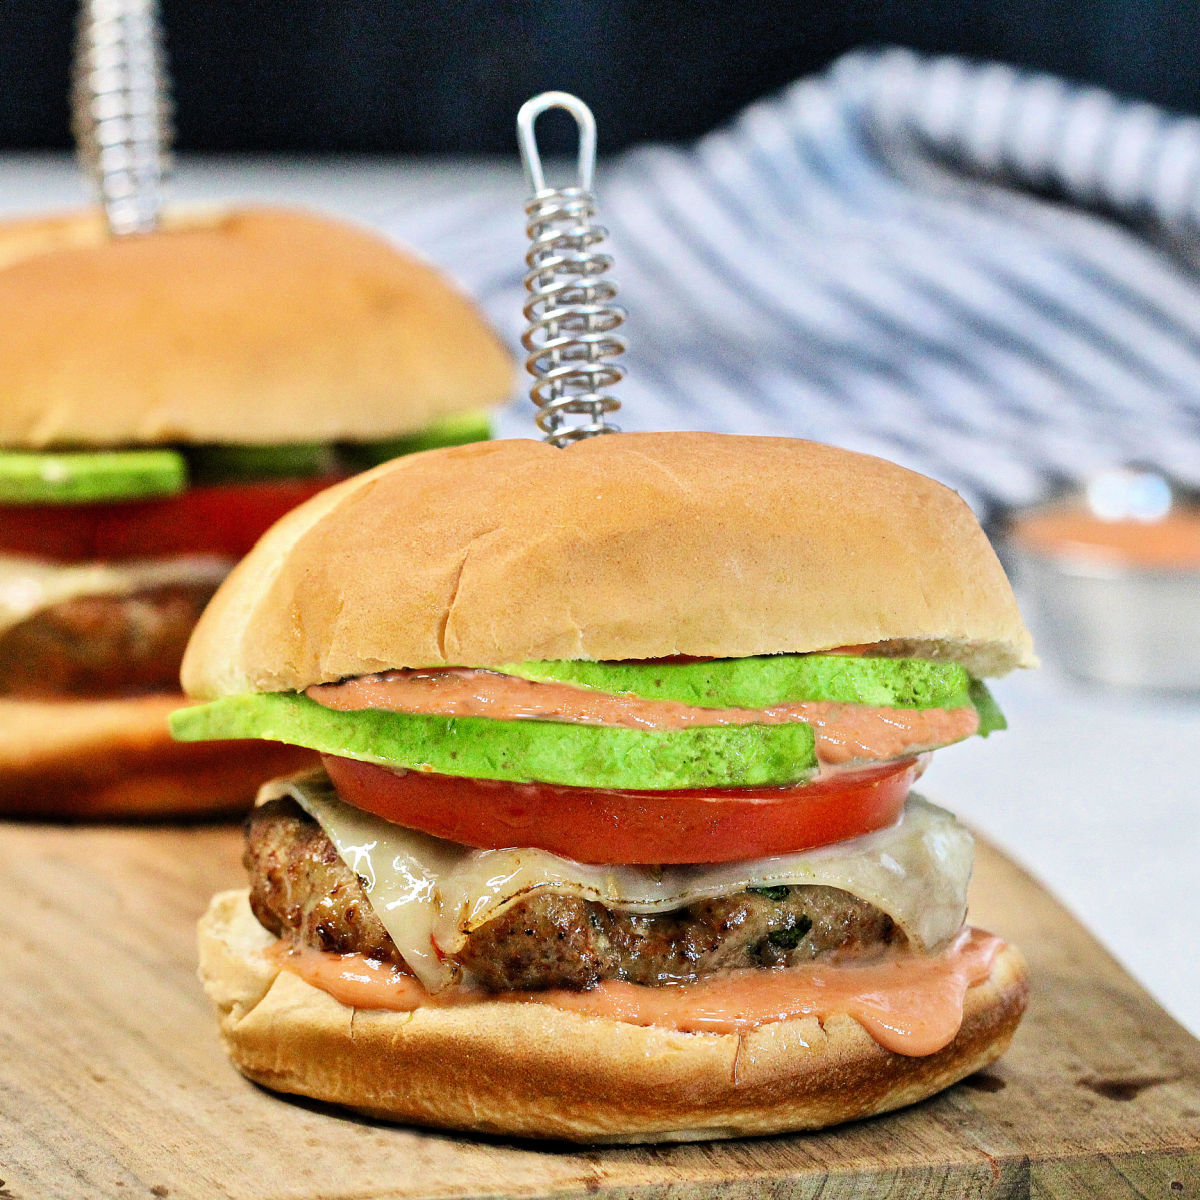 Turkey burgers with cheese, tomato and avocado.